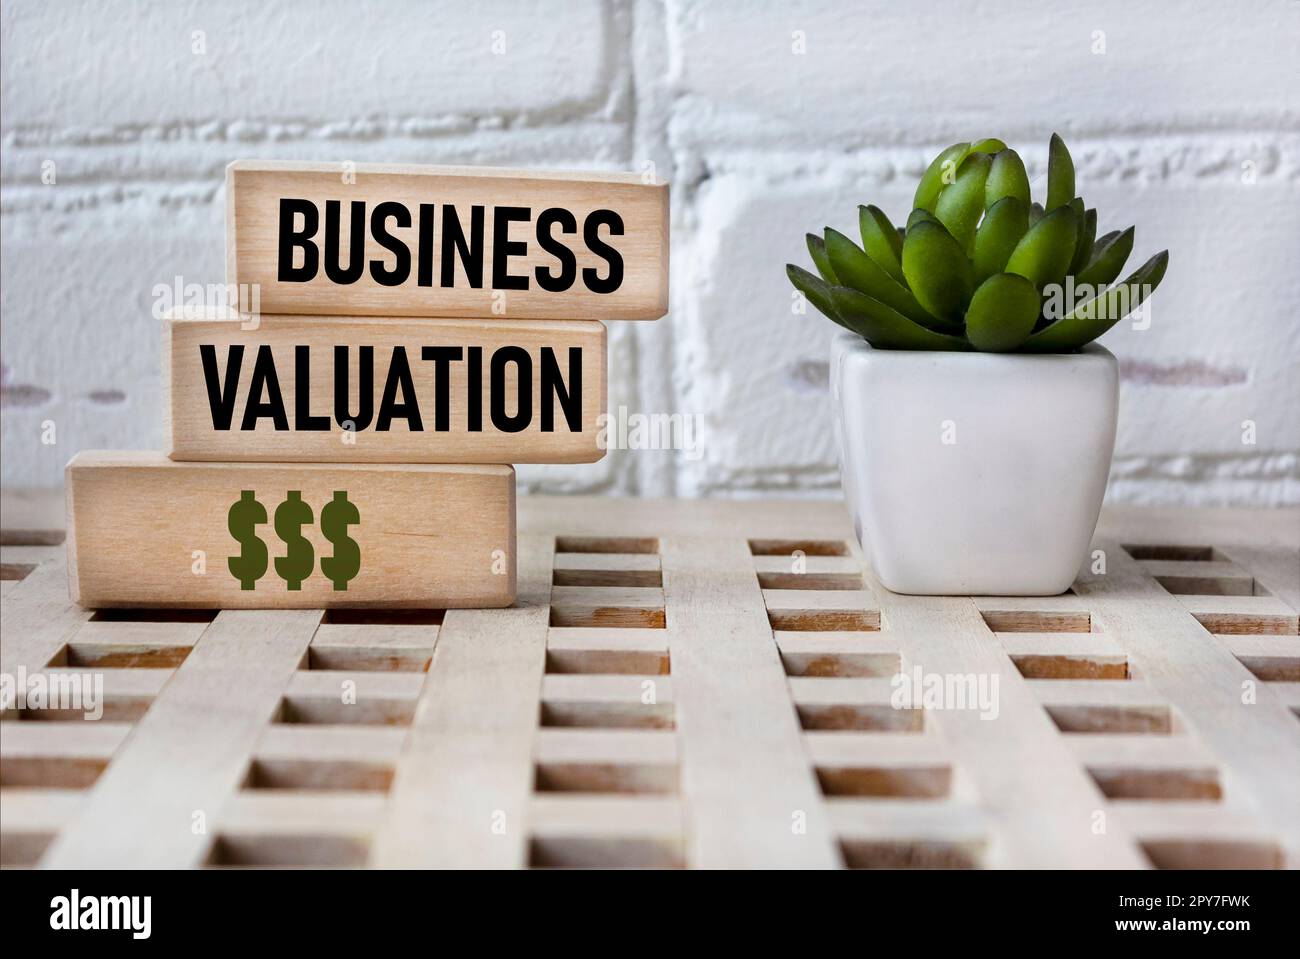 Business valuation. Wooden blocks showing the words. Vintage background with a flower. Basic concepts of finance. Business theme. financial terms. Stock Photo